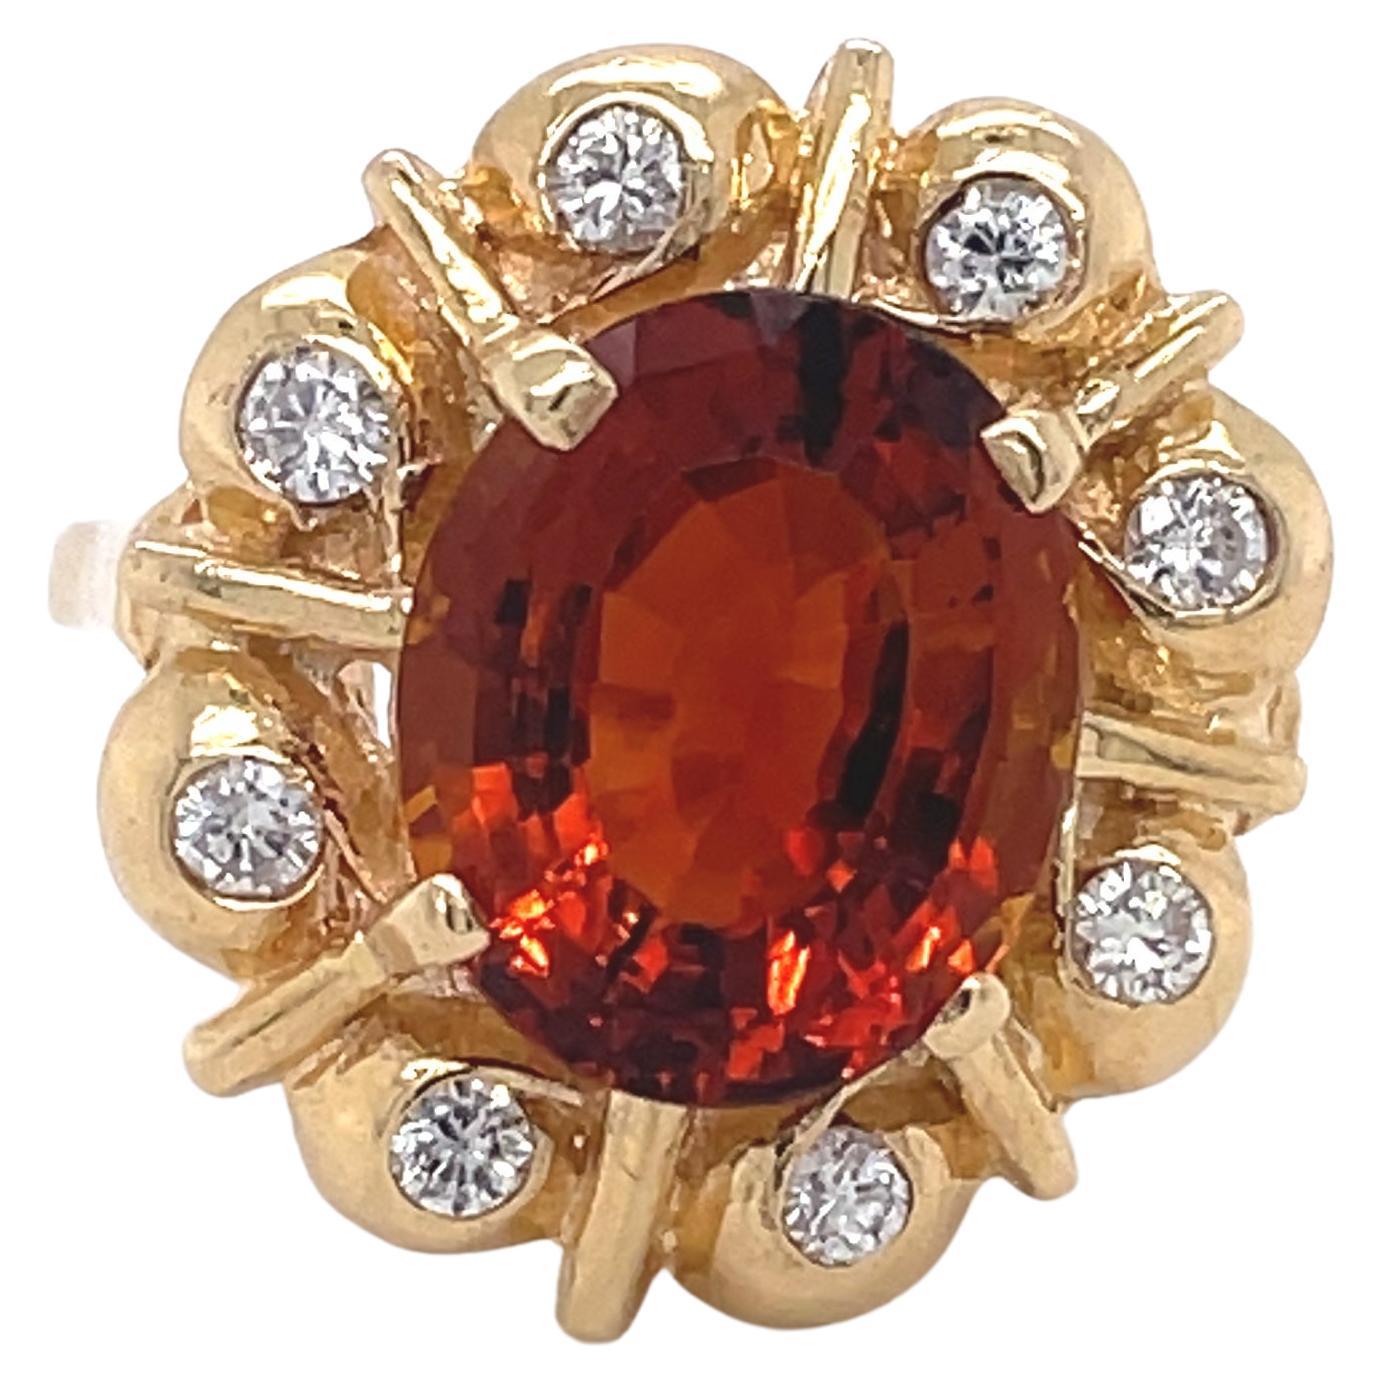 Amazing Victorian Topaz Gemstone And Diamond Band  10k Yellow Gold Ring  Us Size 8 3/4   Oval Shape Stone
 
~~ S e t t i n g ~~
Solid 10k Yellow Gold
7.80 grams
 
~~ Stones ~~
Main Stone:
Oval Shape Natural Topaz In Weight Of 5 Ct (Approx.)
 
Side